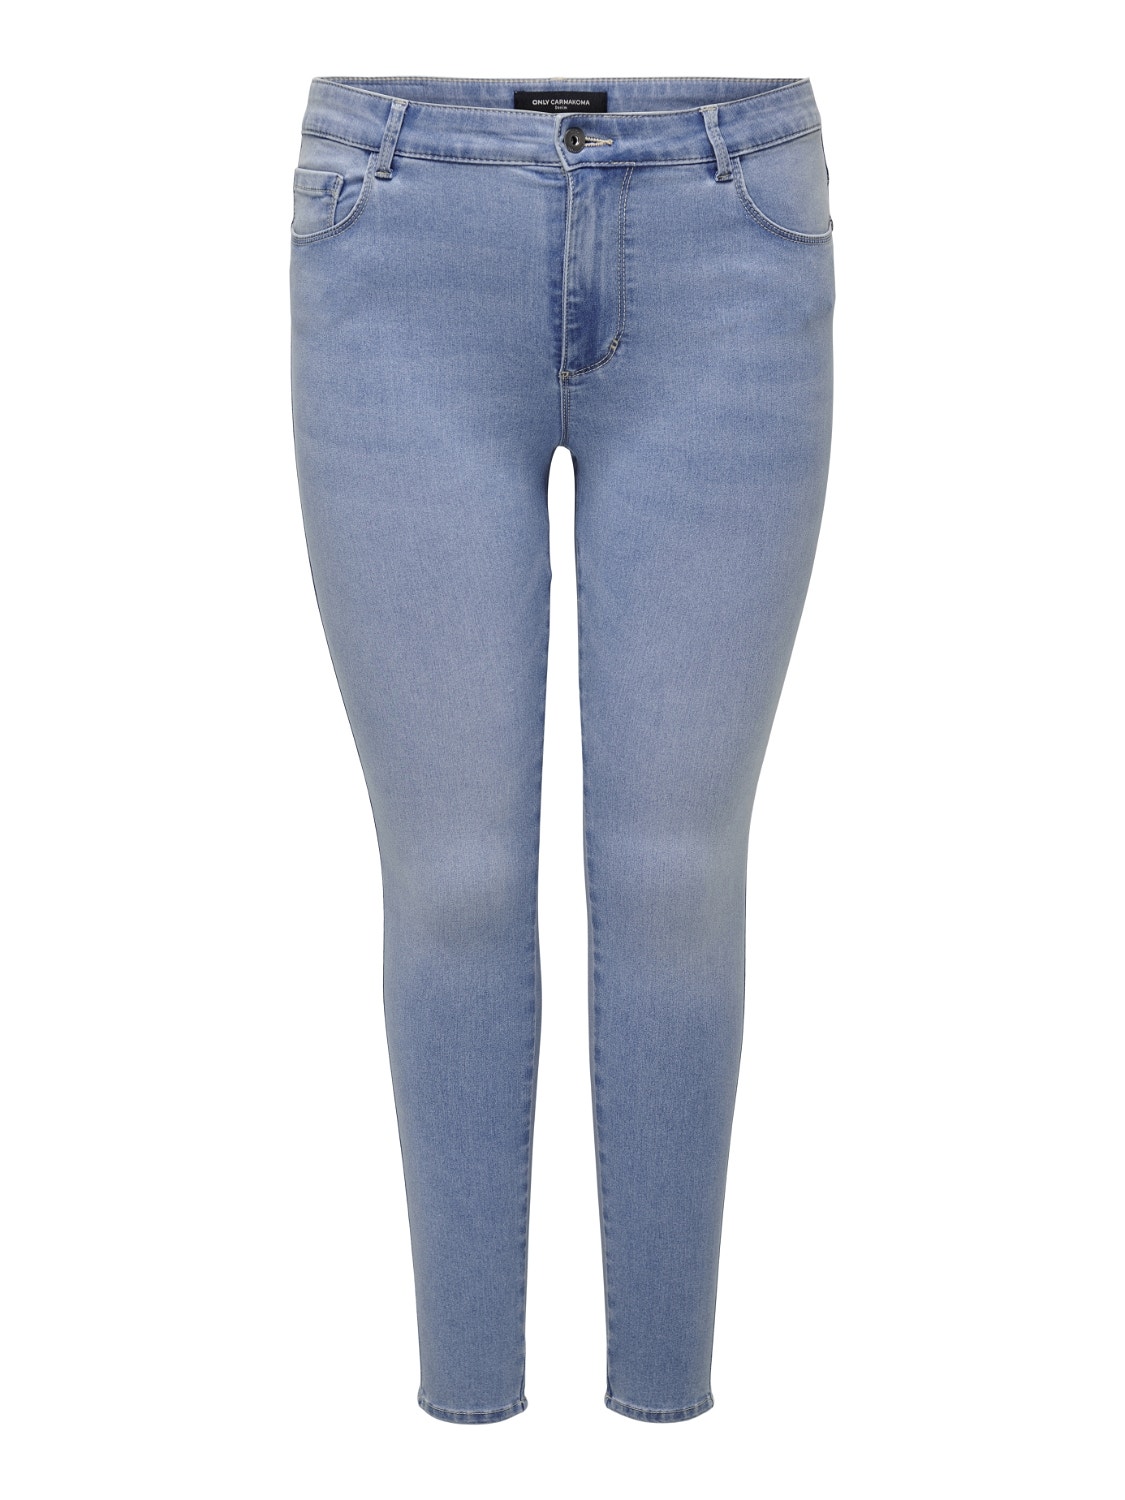 ONLY Skinny Fit Hohe Taille Jeans -Light Blue Denim - 15199400